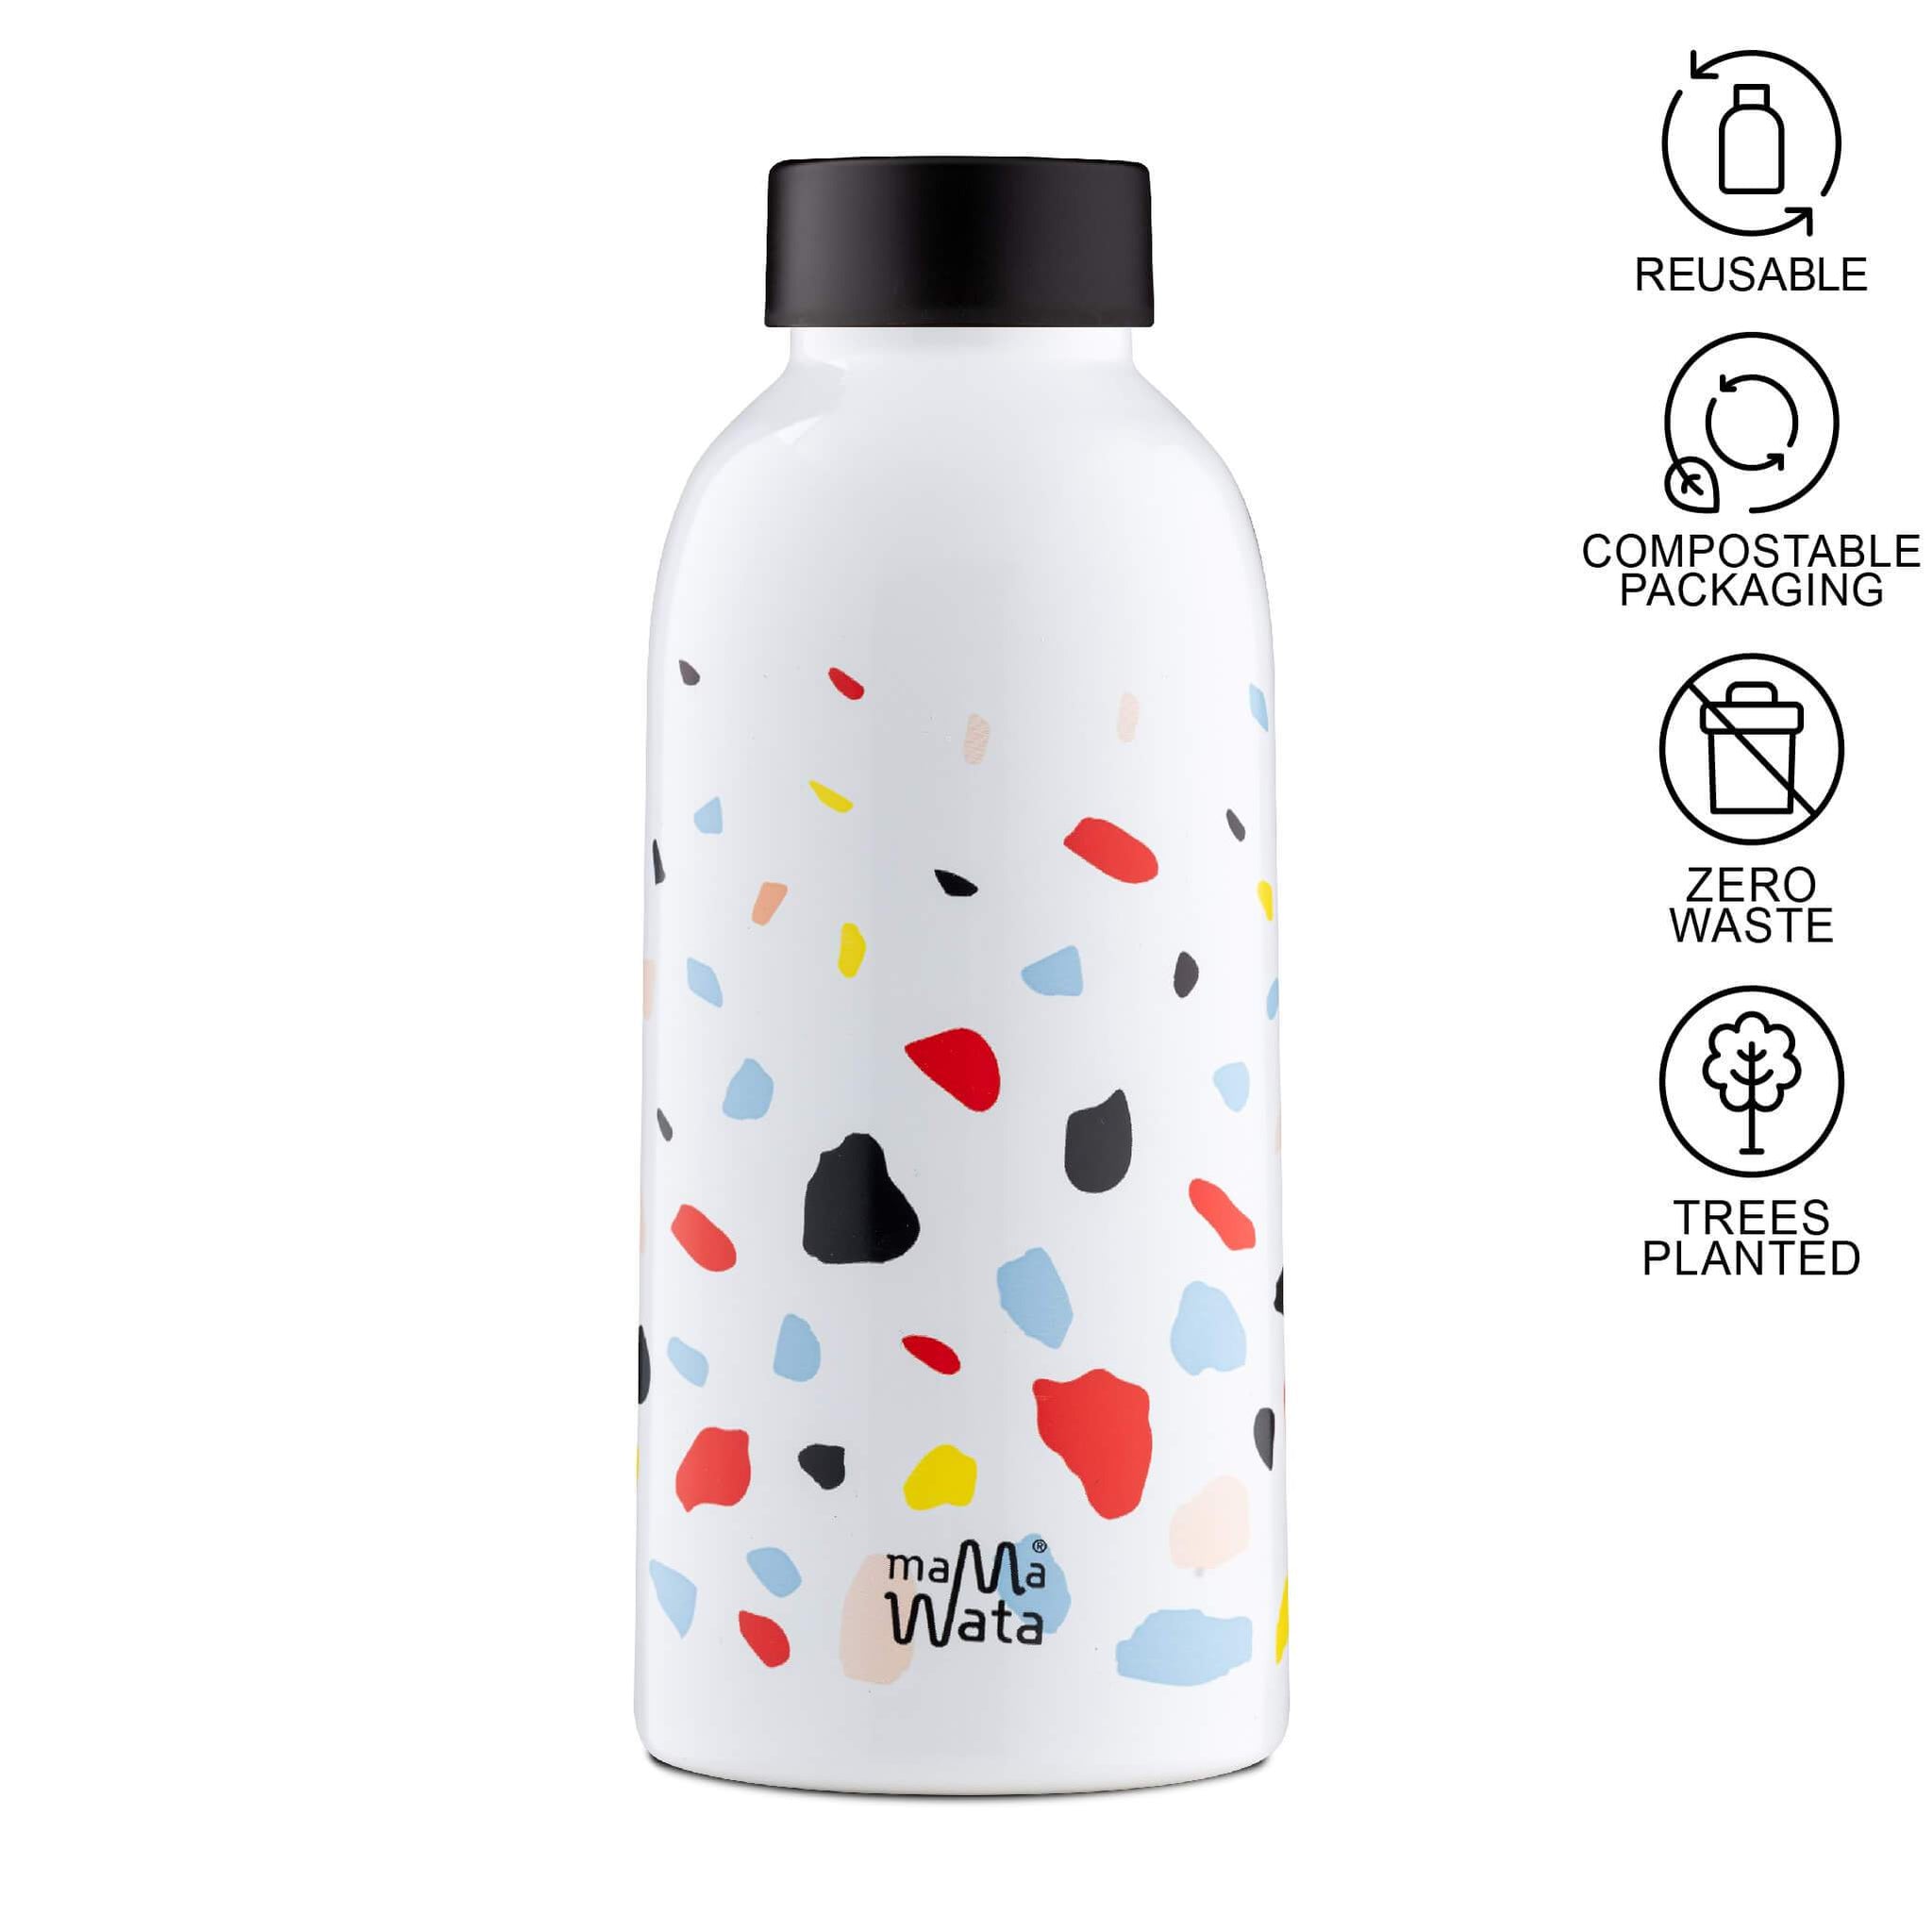 party mama wata climate 500ml water bottle